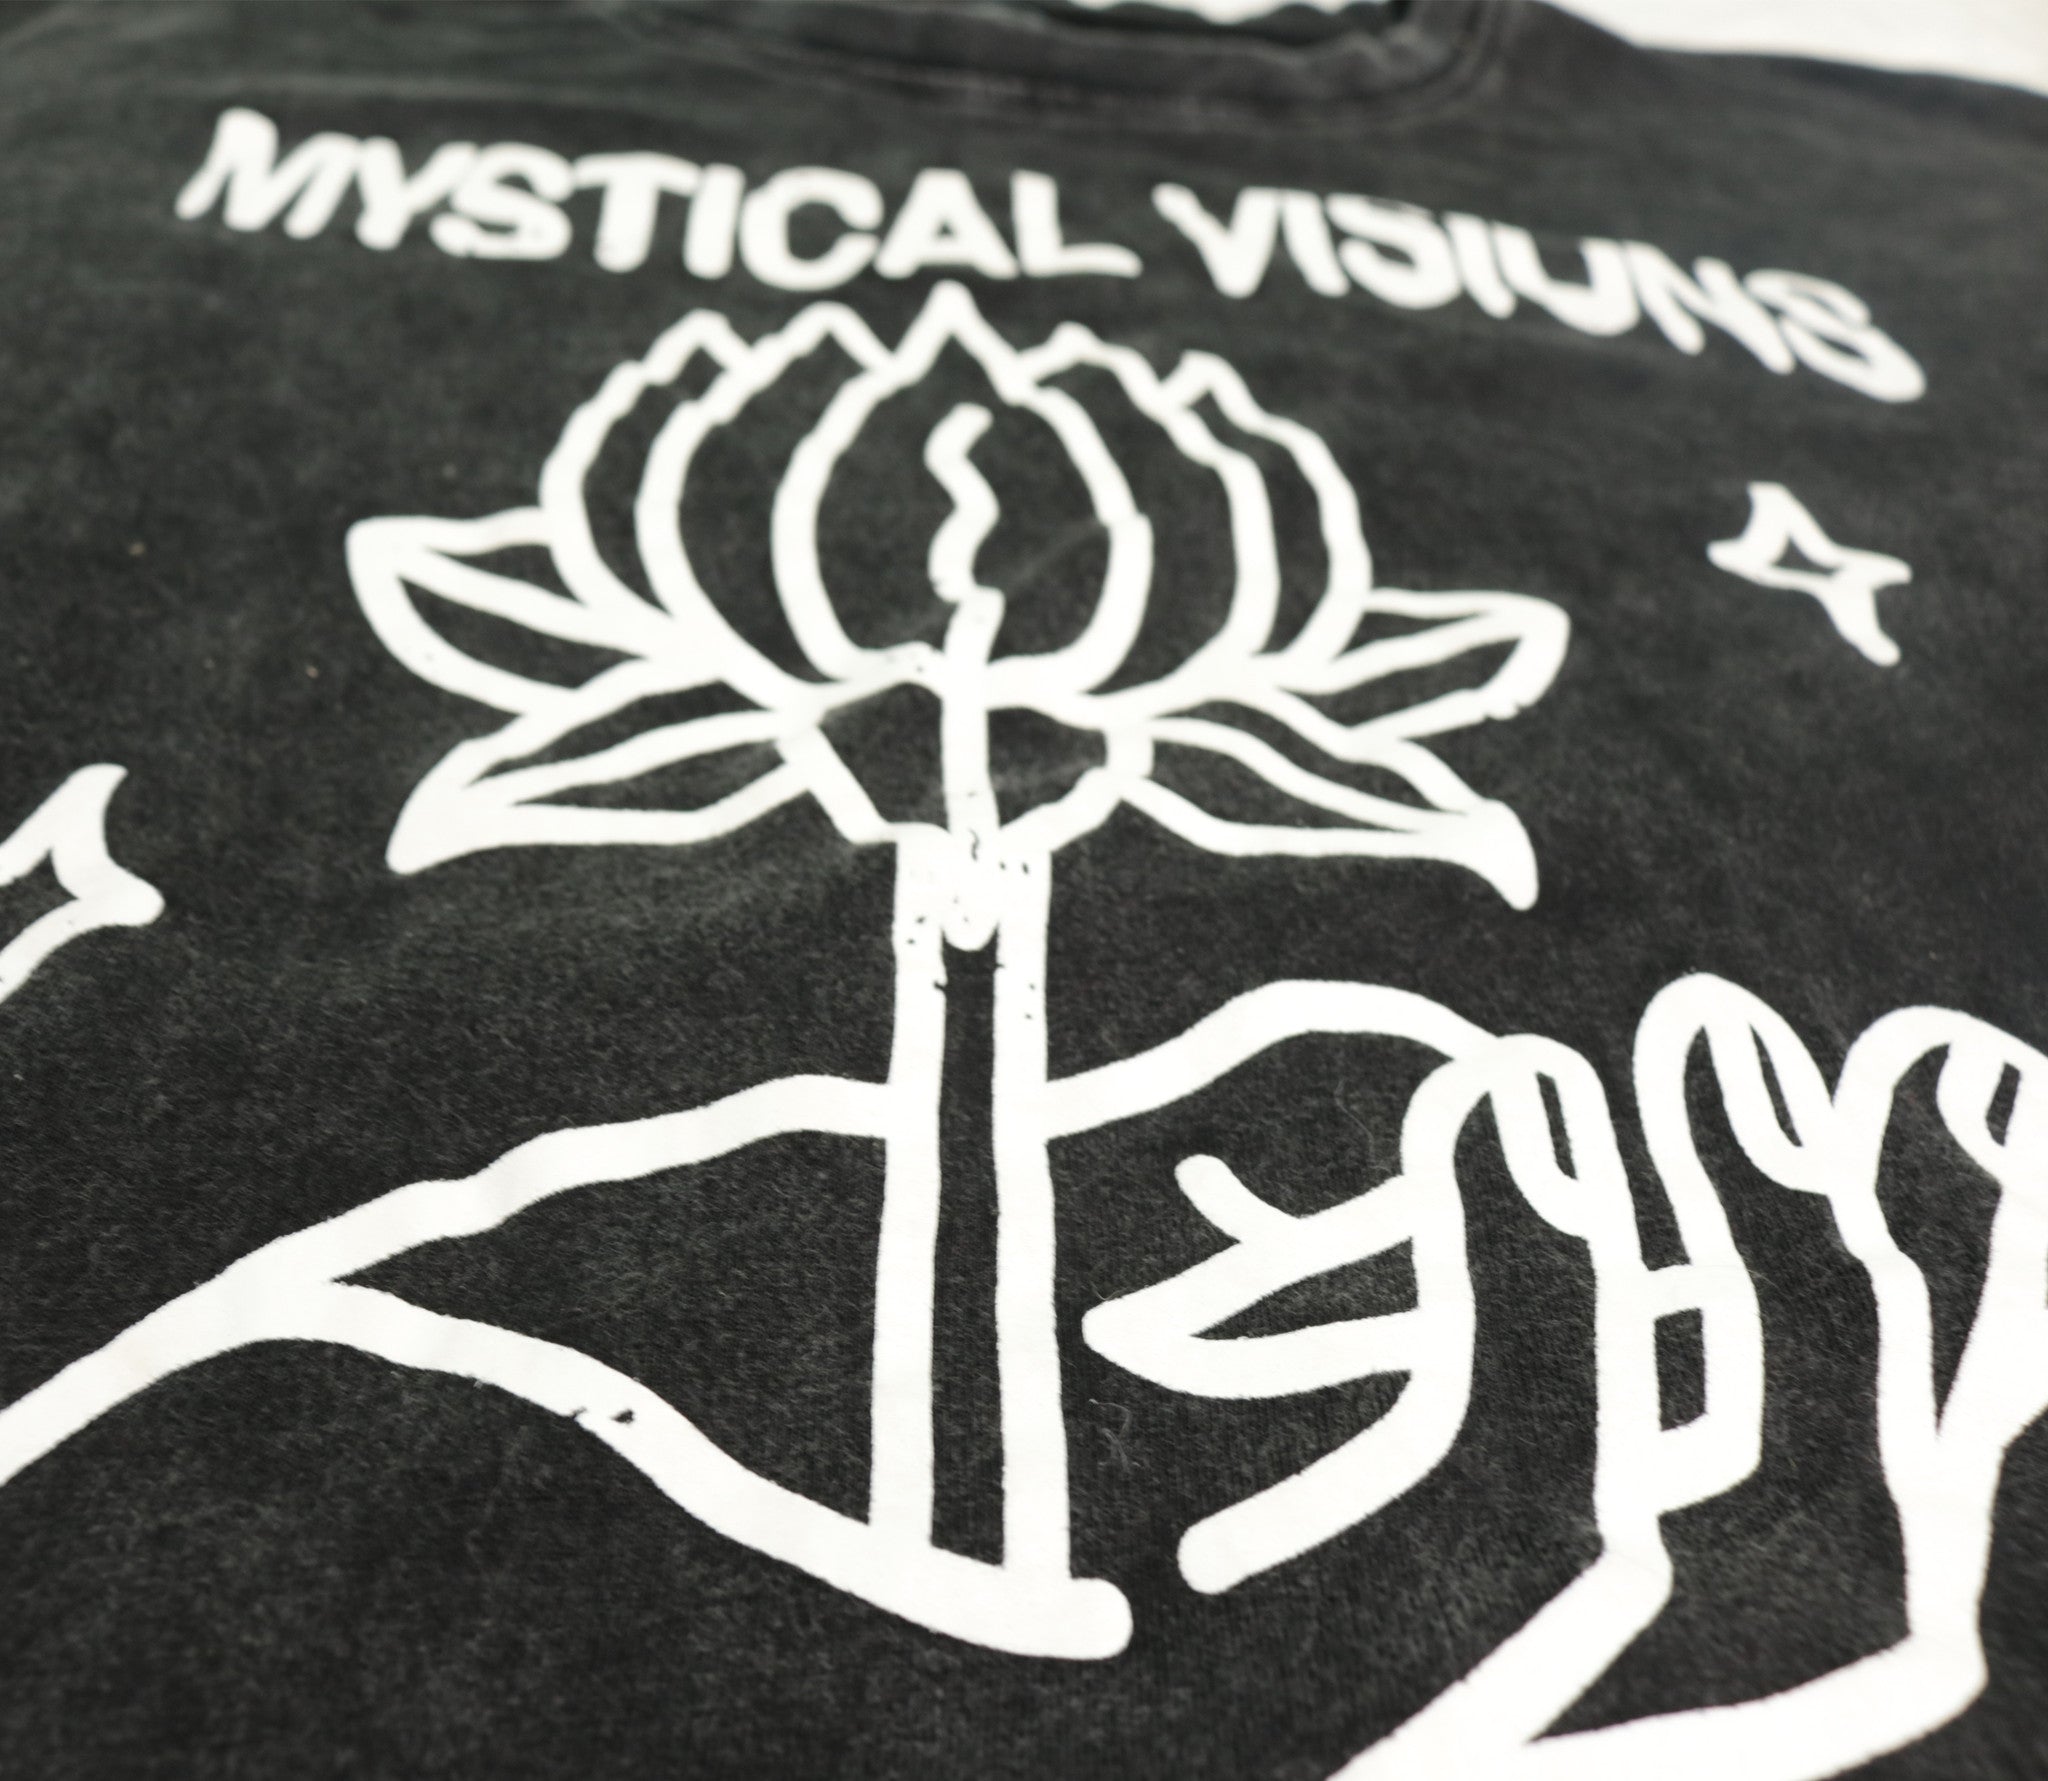 Mystical Visions And Cosmic Vibrations - Oversized Worn Black Shirt  SALE!!